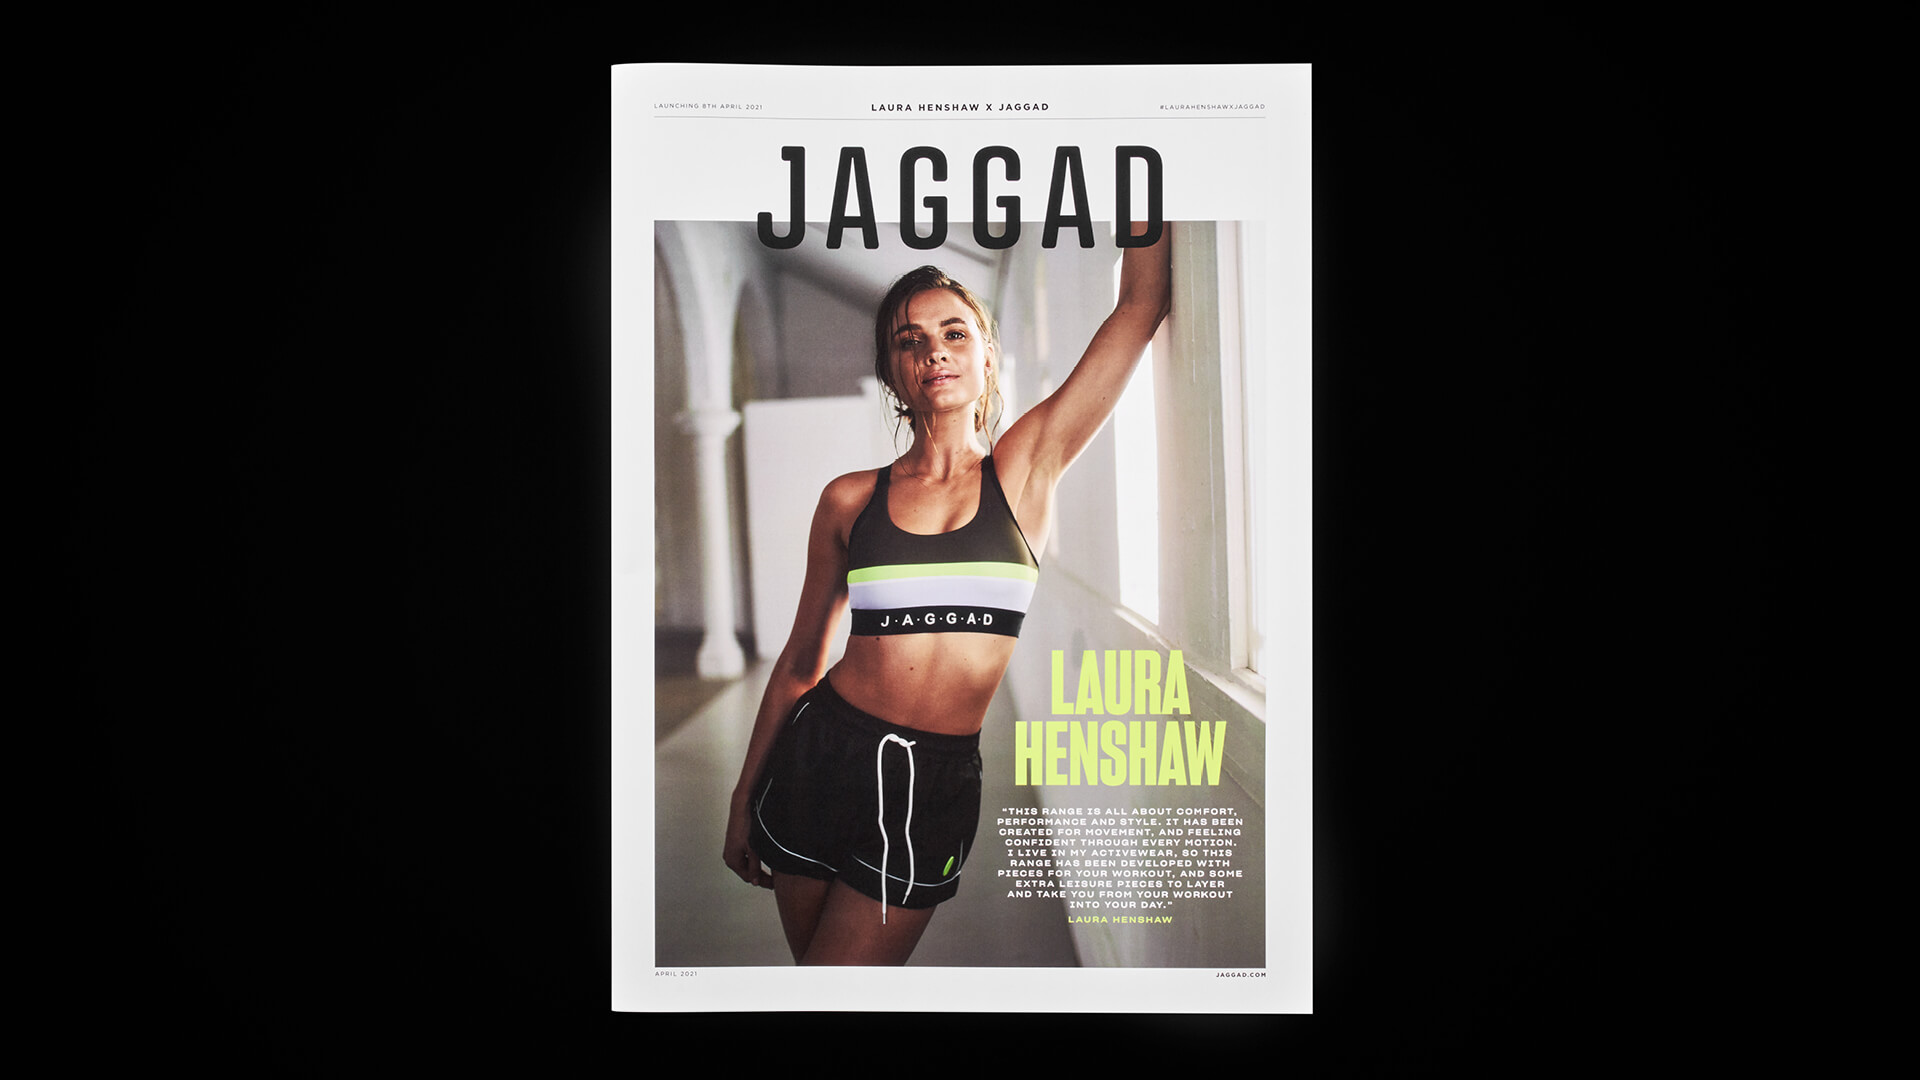 Jaggad x Laura Henshaw Campaign by One&Other